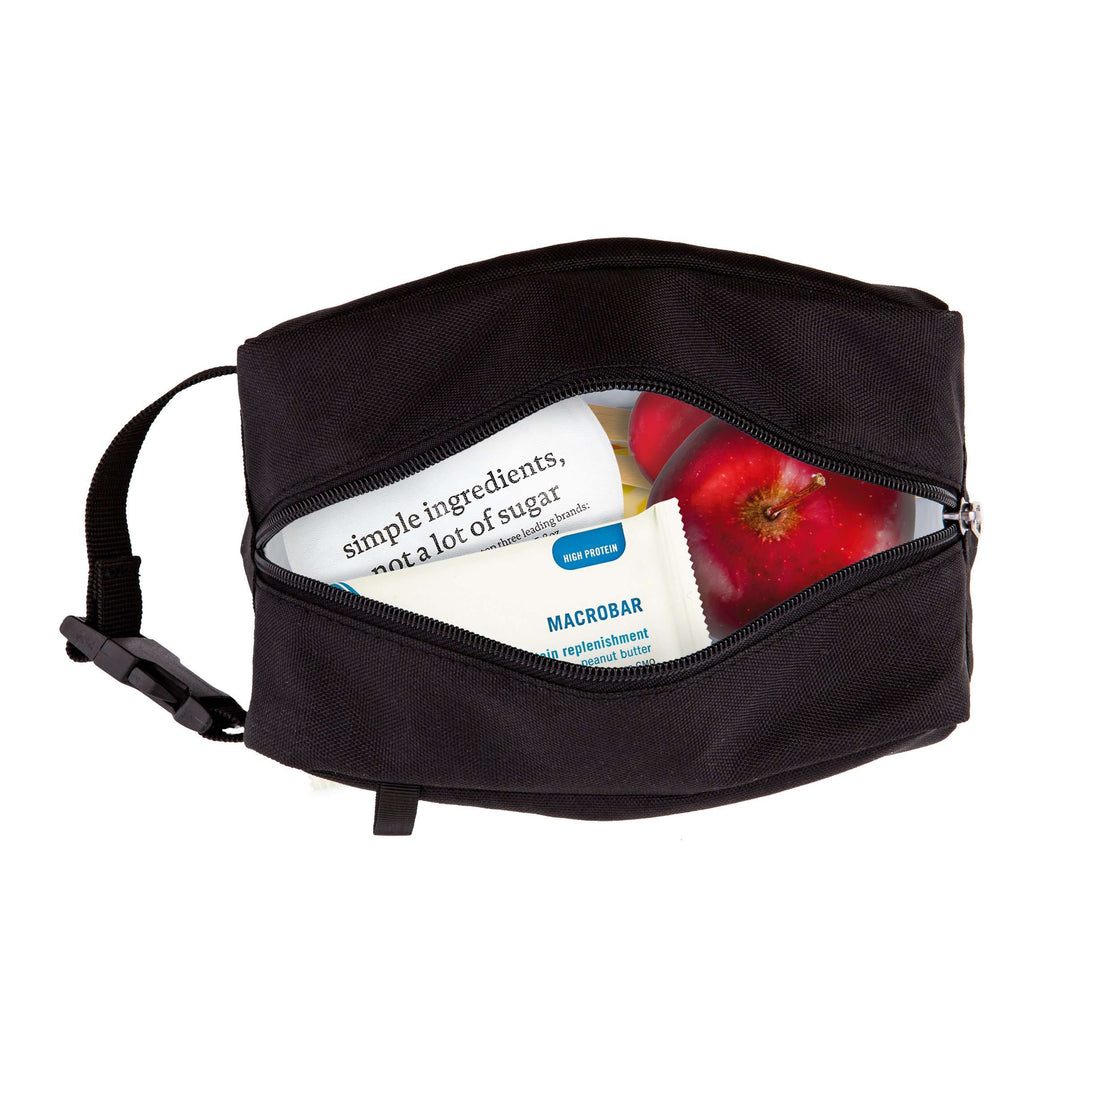 PackIt Freezable Snack Bag, Spaceman, Built with EcoFreeze Technology,  Foldable, Reusable, Zip Closure Locks in Cool Dry Air, Perfect for all  Ages